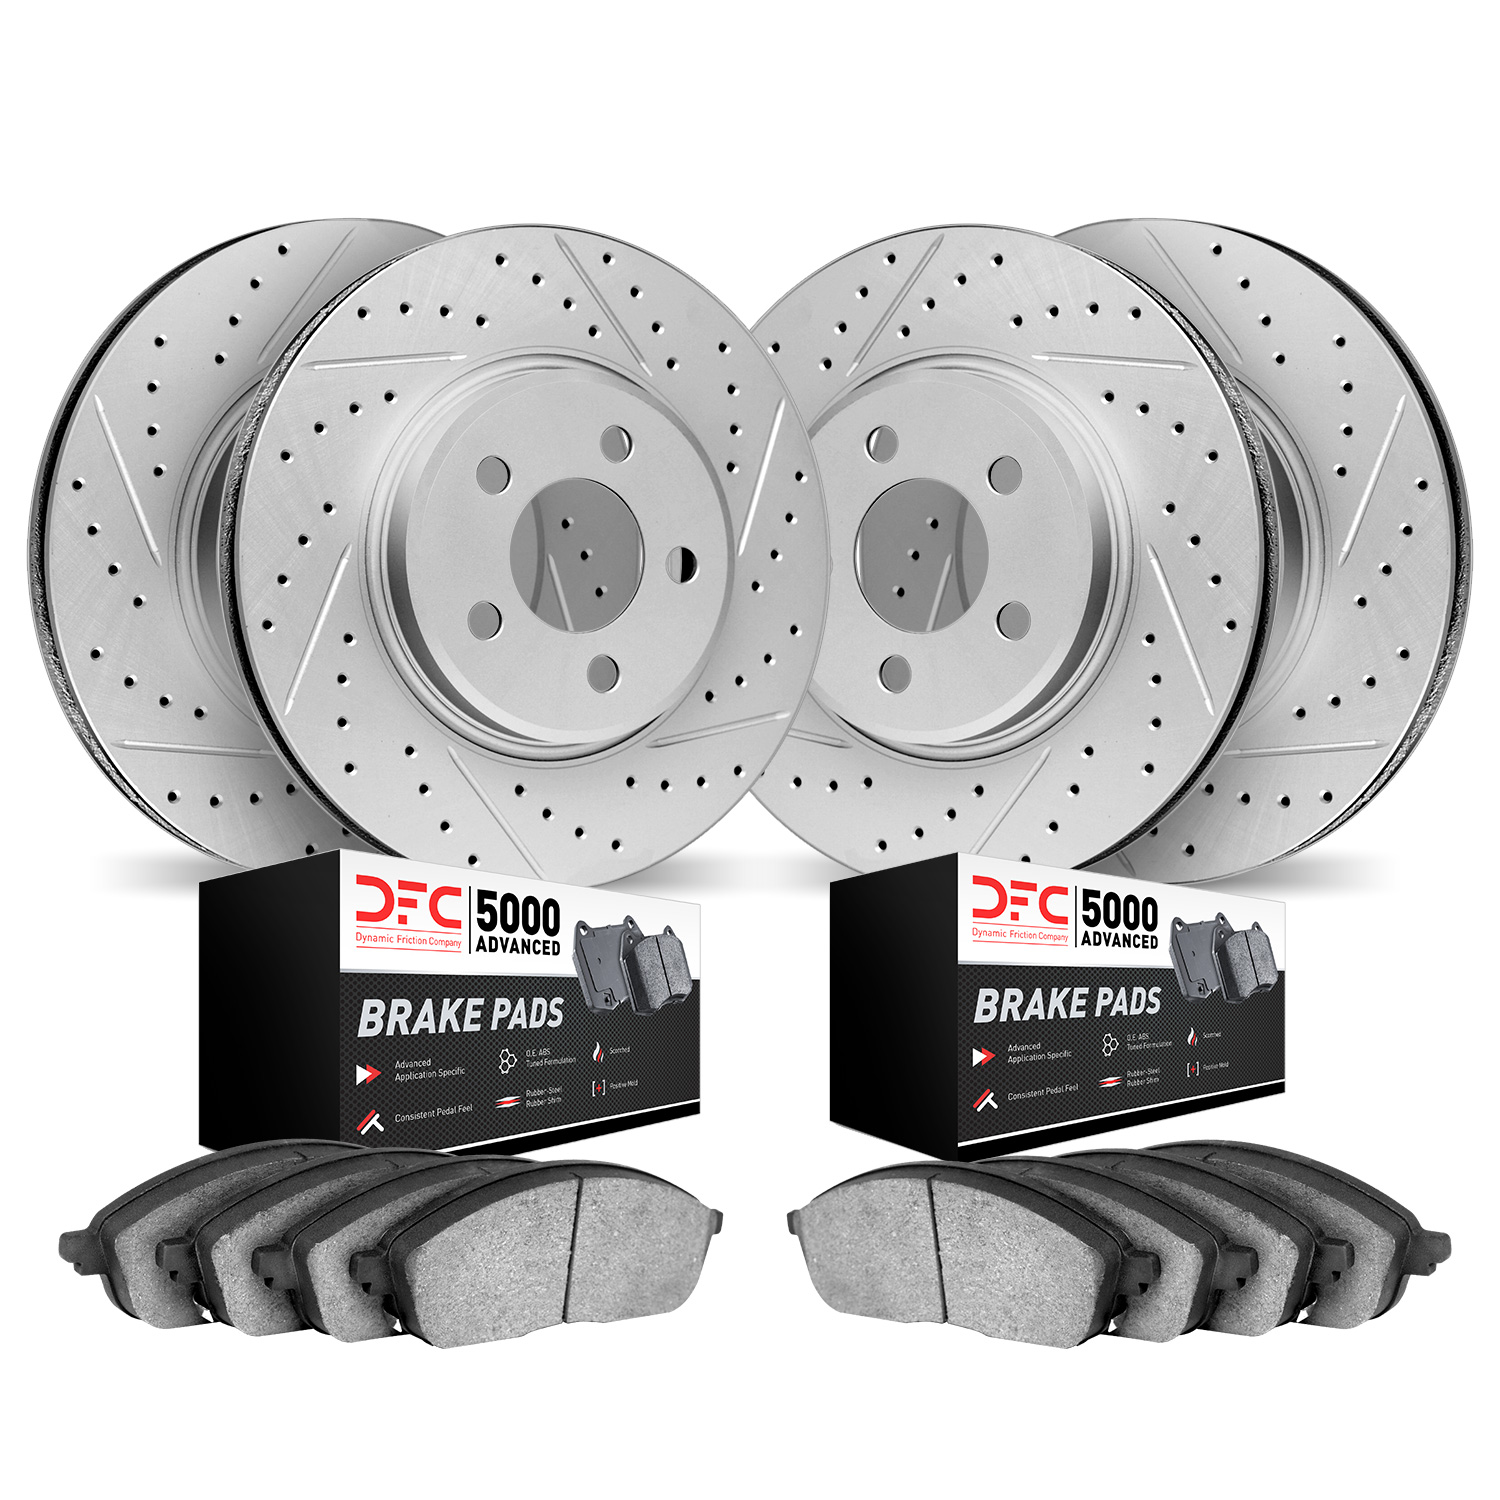 2504-39014 Geoperformance Drilled/Slotted Rotors w/5000 Advanced Brake Pads Kit, 2005-2020 Mopar, Position: Front and Rear